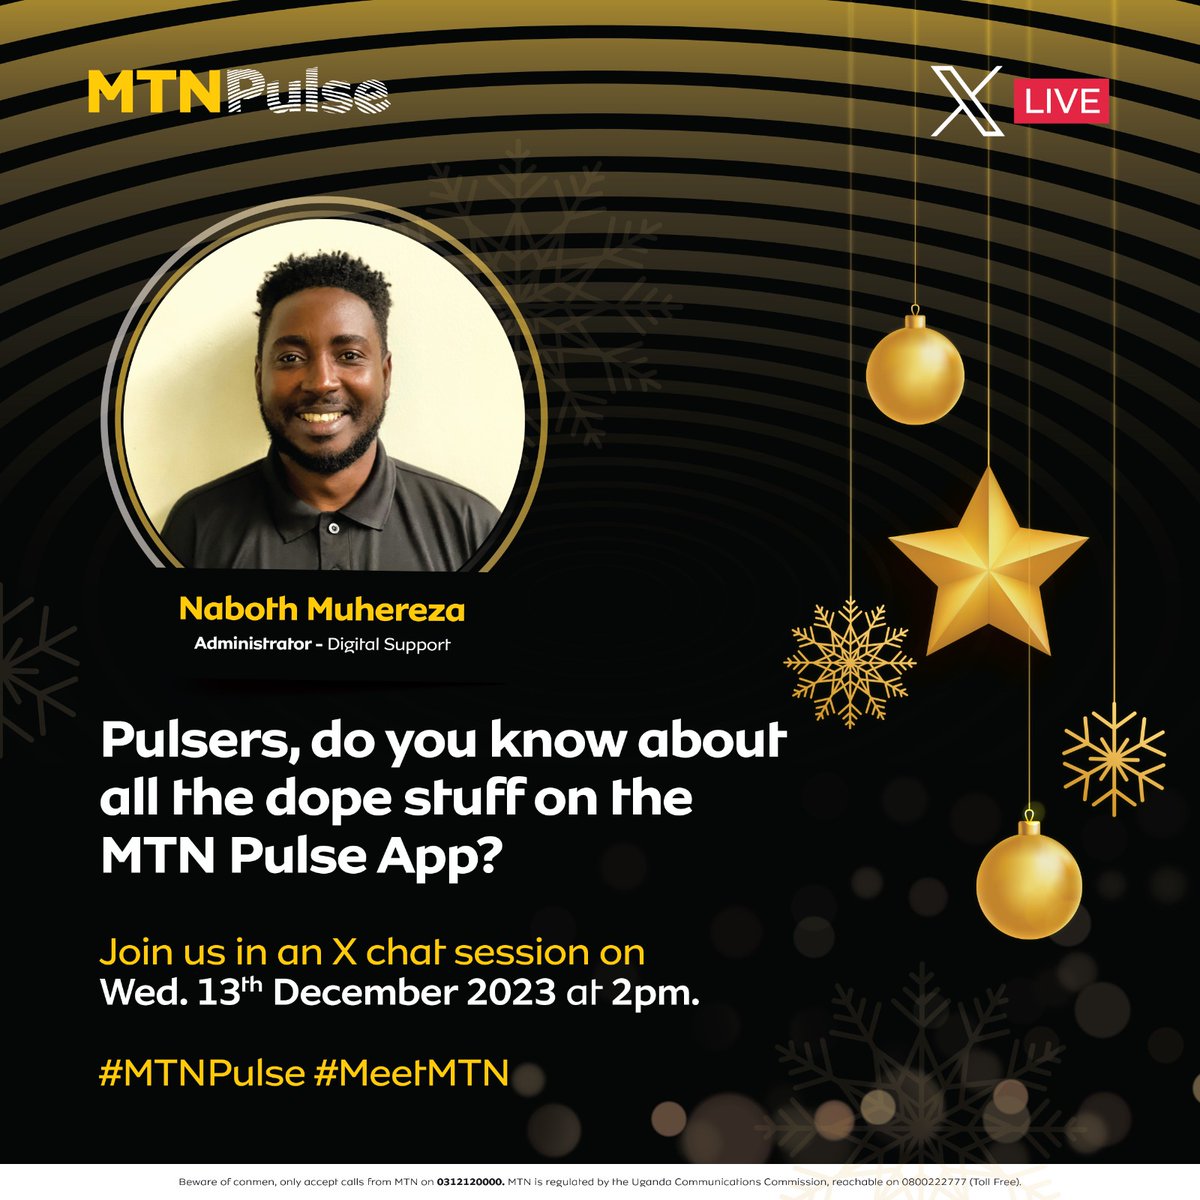 Attention Pulsers! Be part of an X chat session with Naboth Muhereza and get to know more about the MTN Pulse app and how you can benefit from it.
Today at 2pm, don't miss out. 
#MeetMTN #MTNPulse #PulseRadioUG